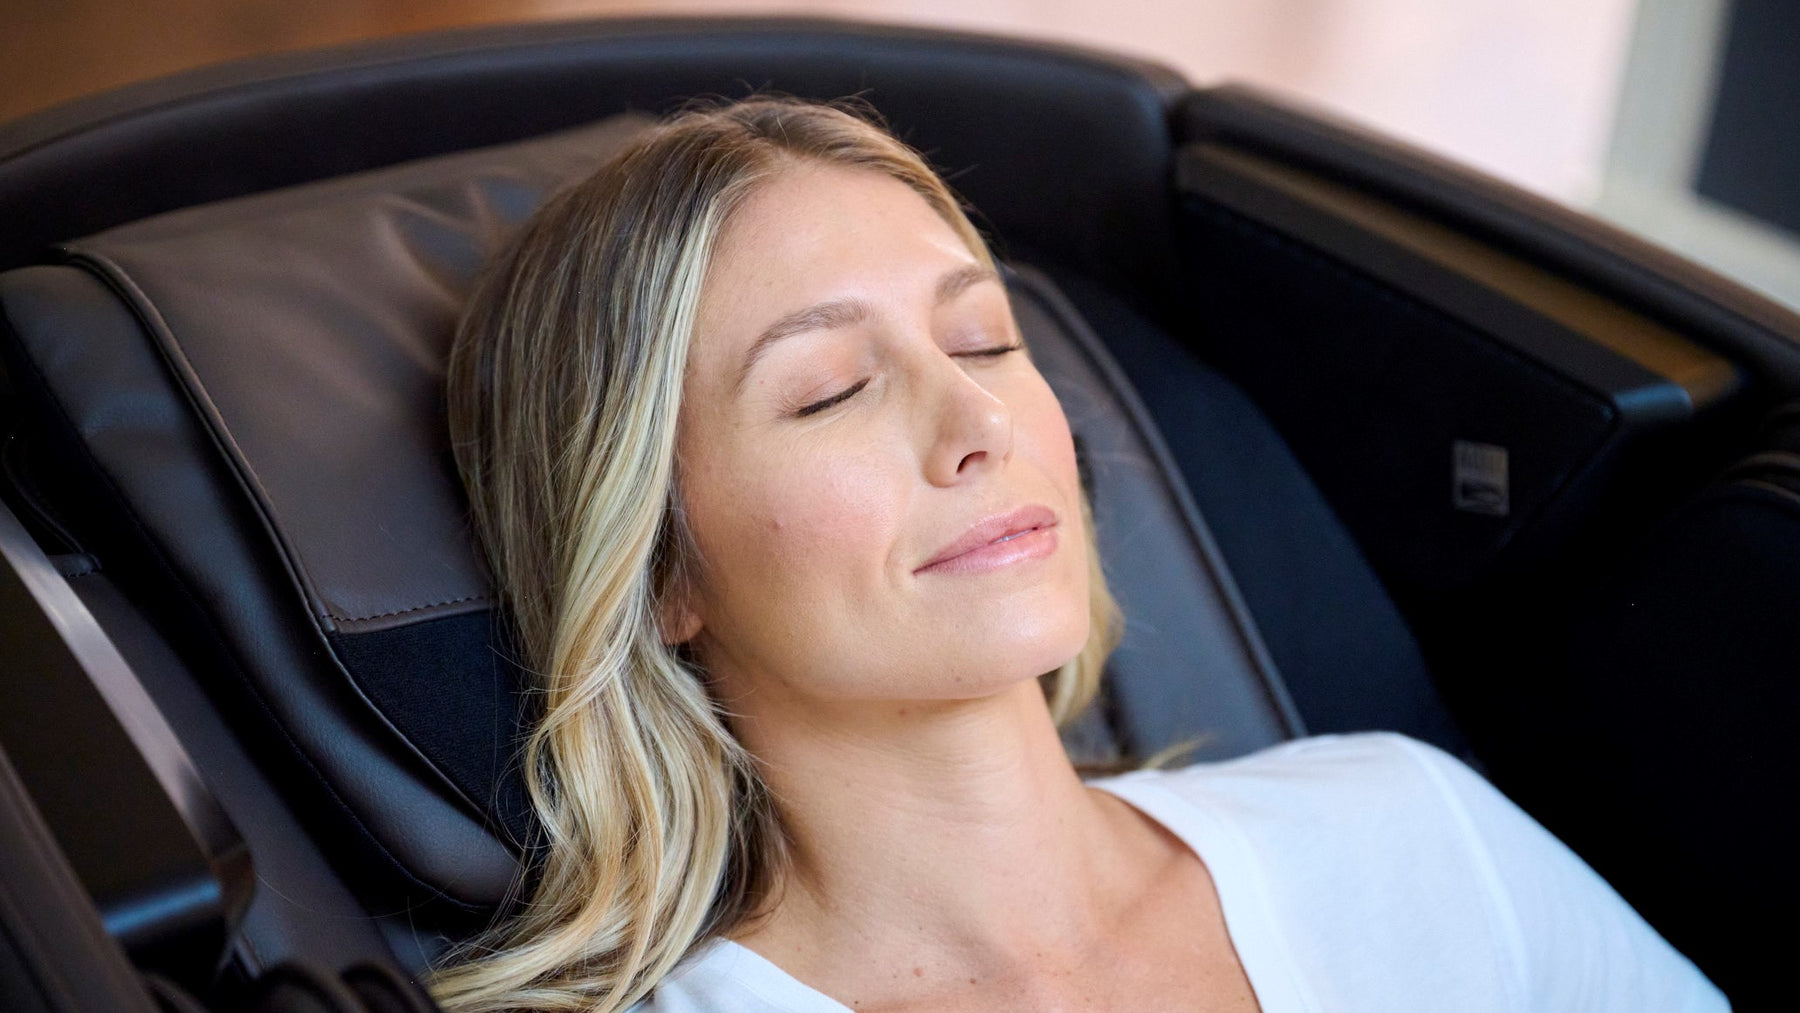 Create you own spa - Relax in a Massage Chair with a weighted blanket and eye mask